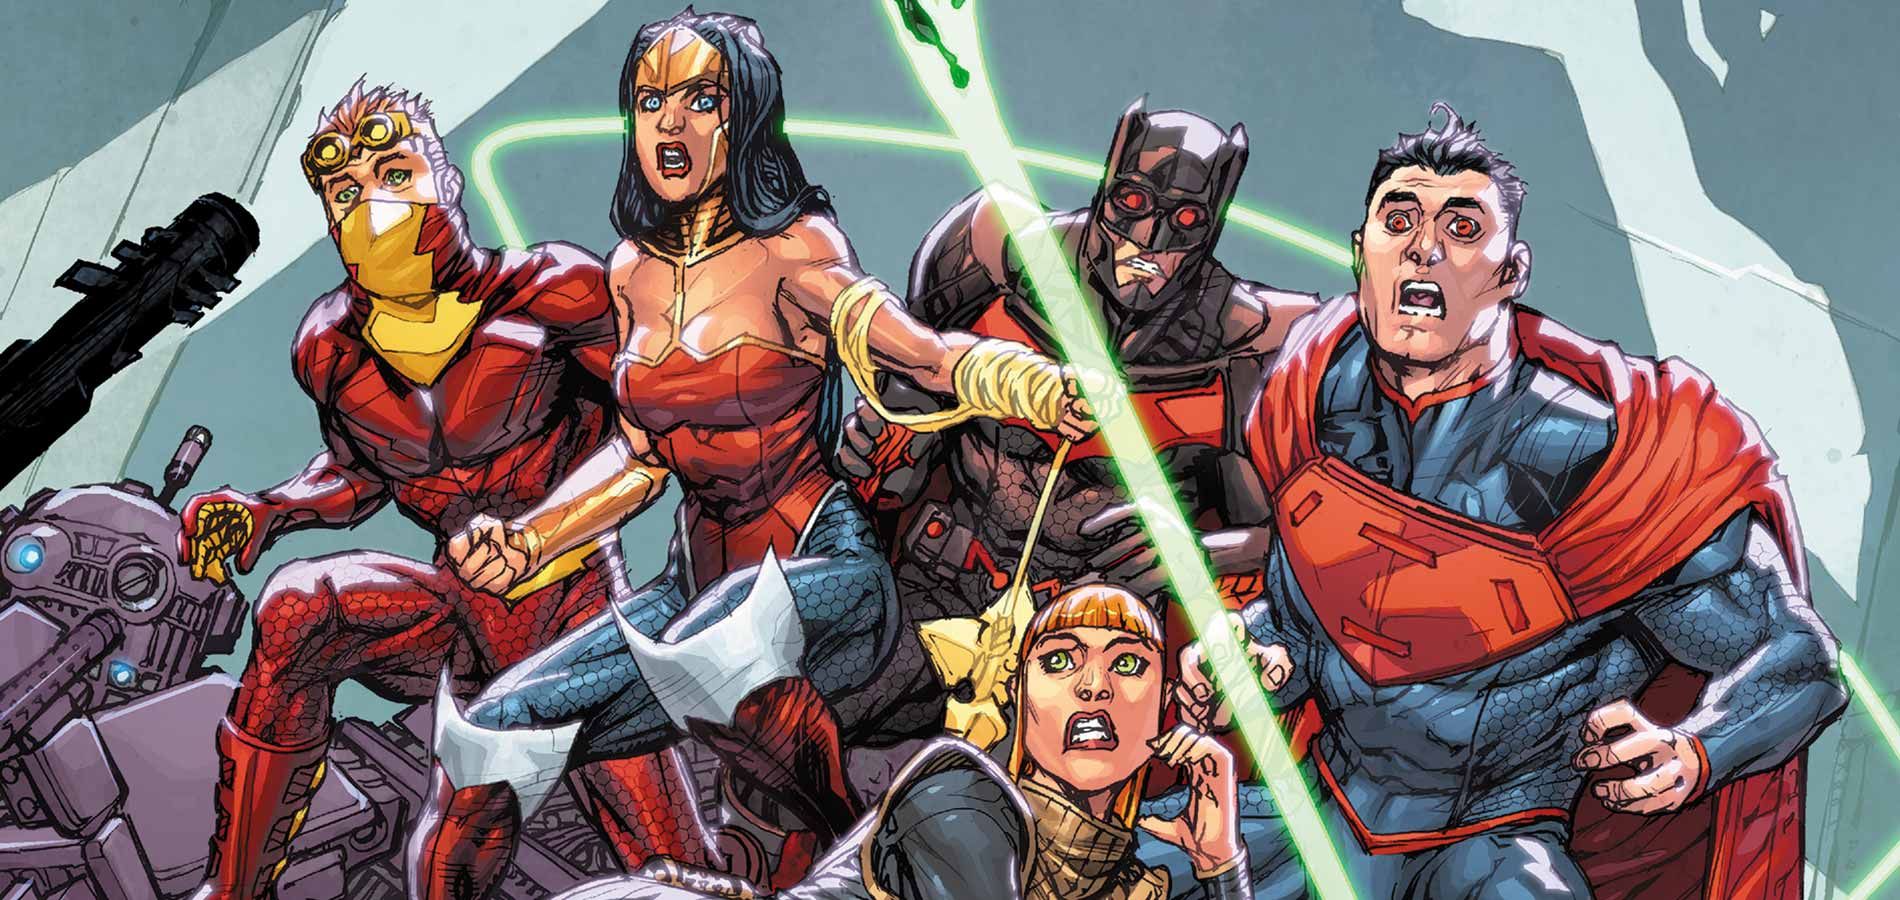 Group shot of the DC heroes in Justice League 3000